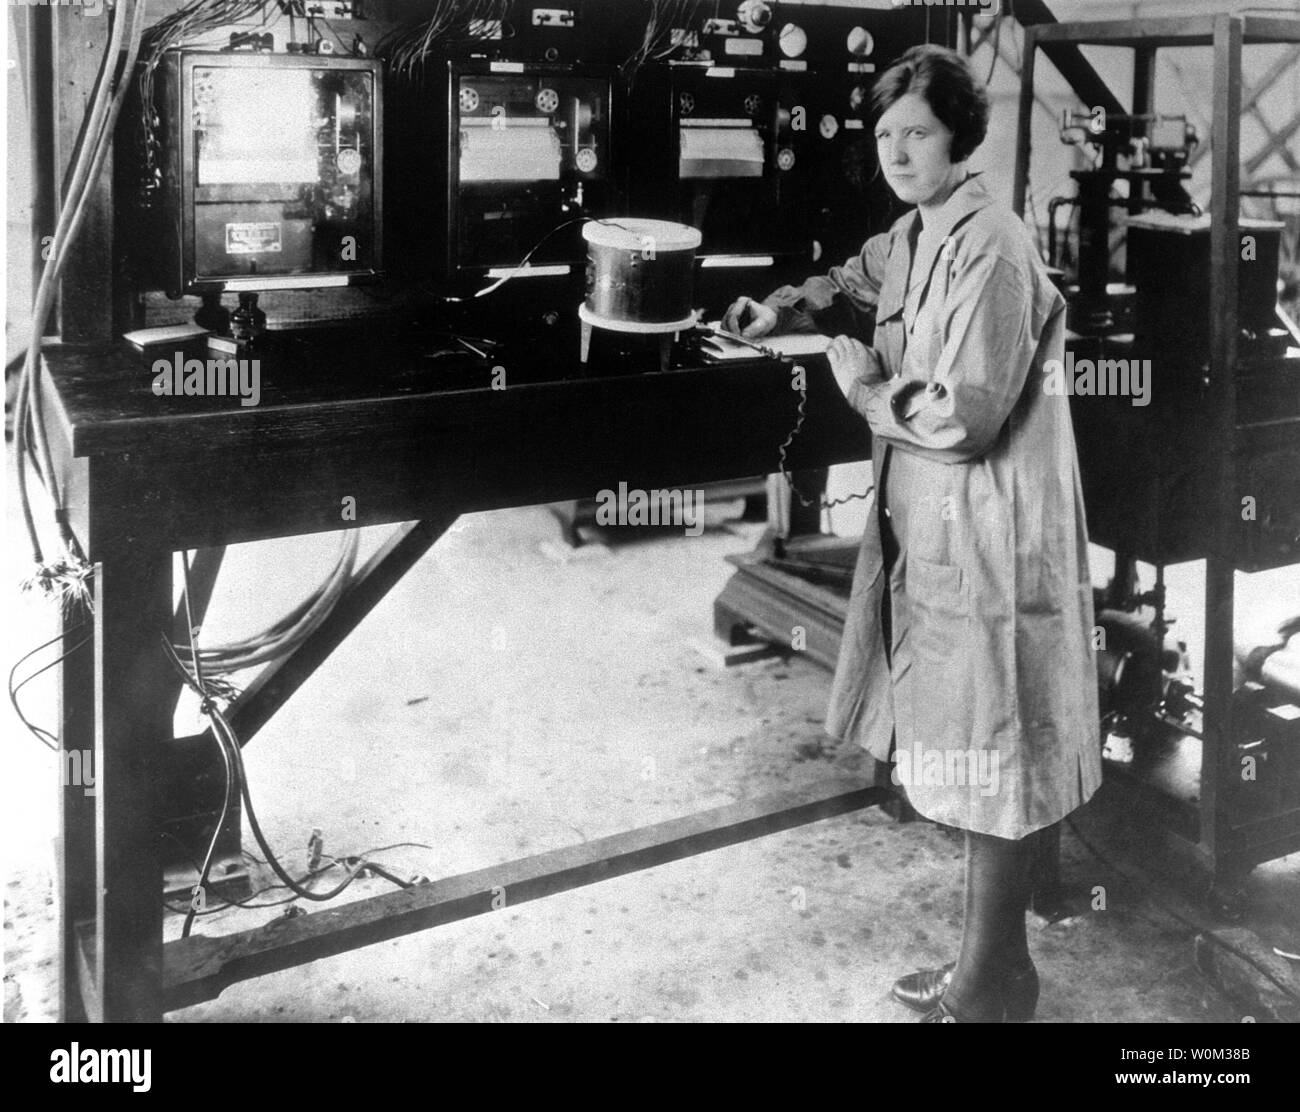 In this March 29, 1929, photograph, Pearl I. Young is working in the Langley Memorial Aeronautical Laboratory's Flight Instrumentation Facility (Building 1202). Young was the first woman hired as a technical employee, a physicist at the National Advisory Committee for Aeronautics (NACA) and the second female physicist working for the federal government. Ms. Young graduated in 1919 from the University of North Dakota (UND) as a Phi Beta Kappa with a triple major in physics, mathematics, and chemistry. In 1922, she accepted an appointment at the NACA's Langley Memorial Aeronautical Laboratory (n Stock Photo